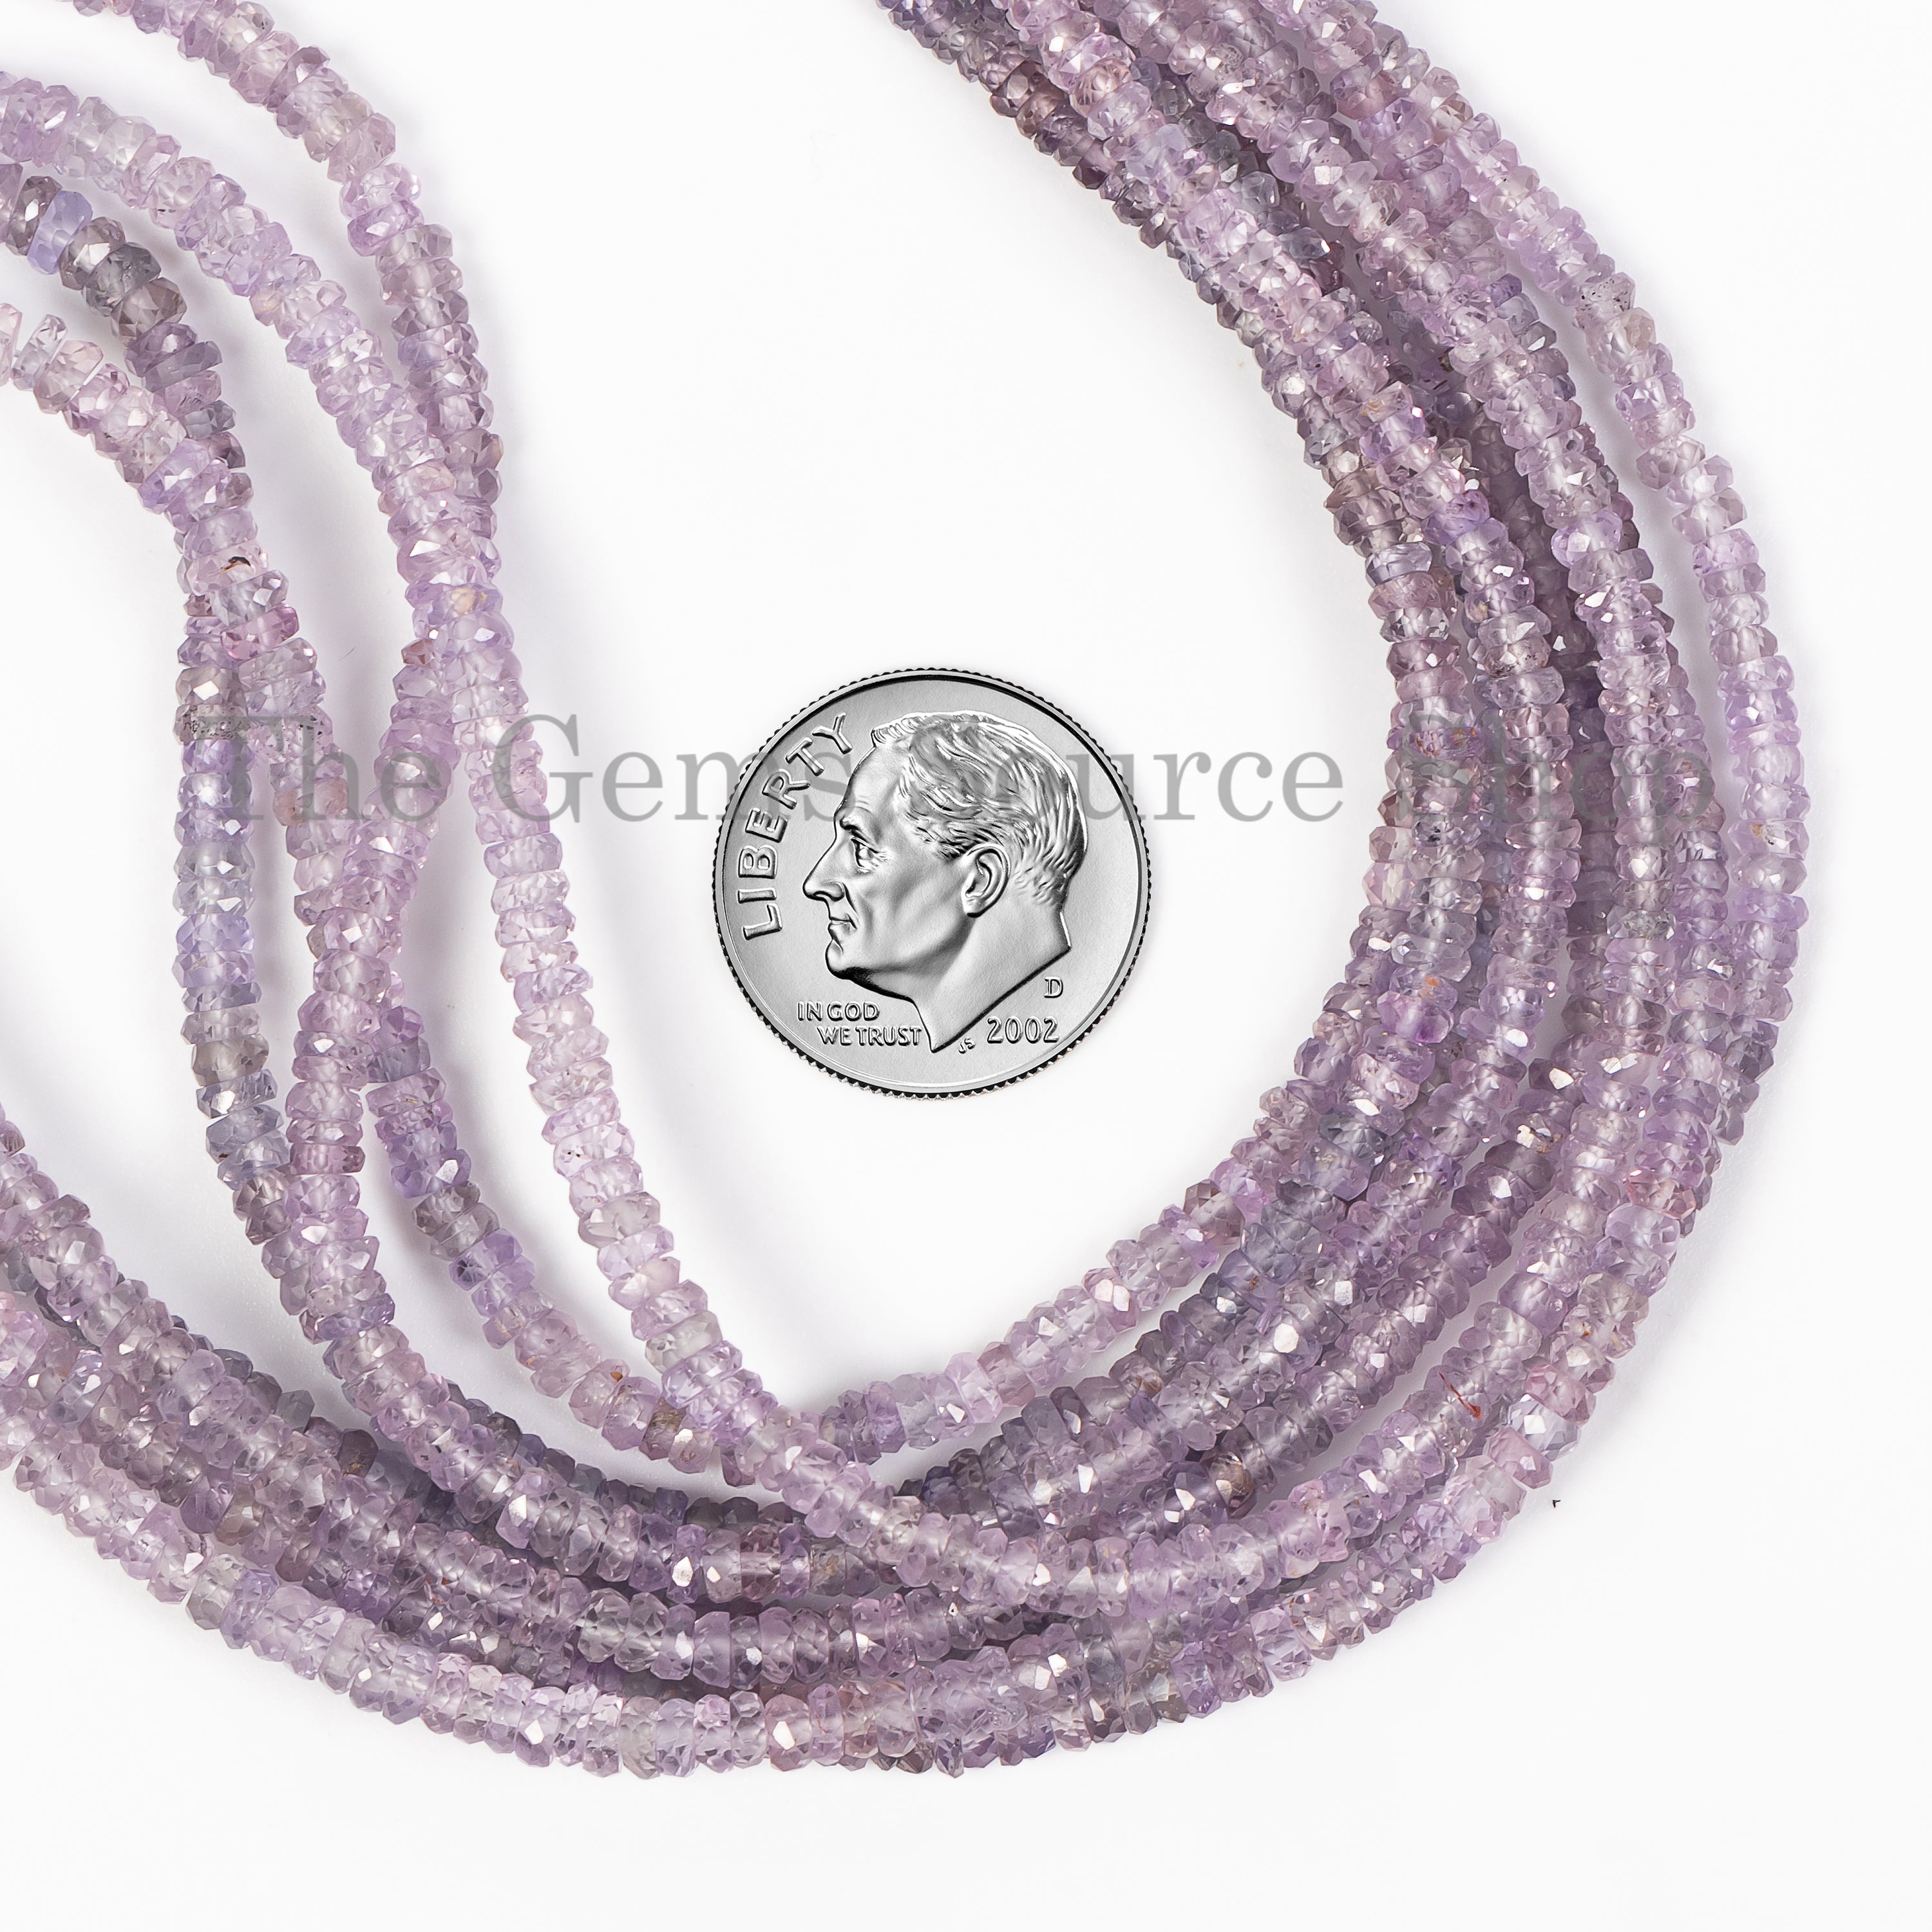 Lavender Sapphire Faceted Rondelle Beads, Natural Precious Gemstone Beads, 2.5-3.80mm Sapphire Beads, TGS-5061